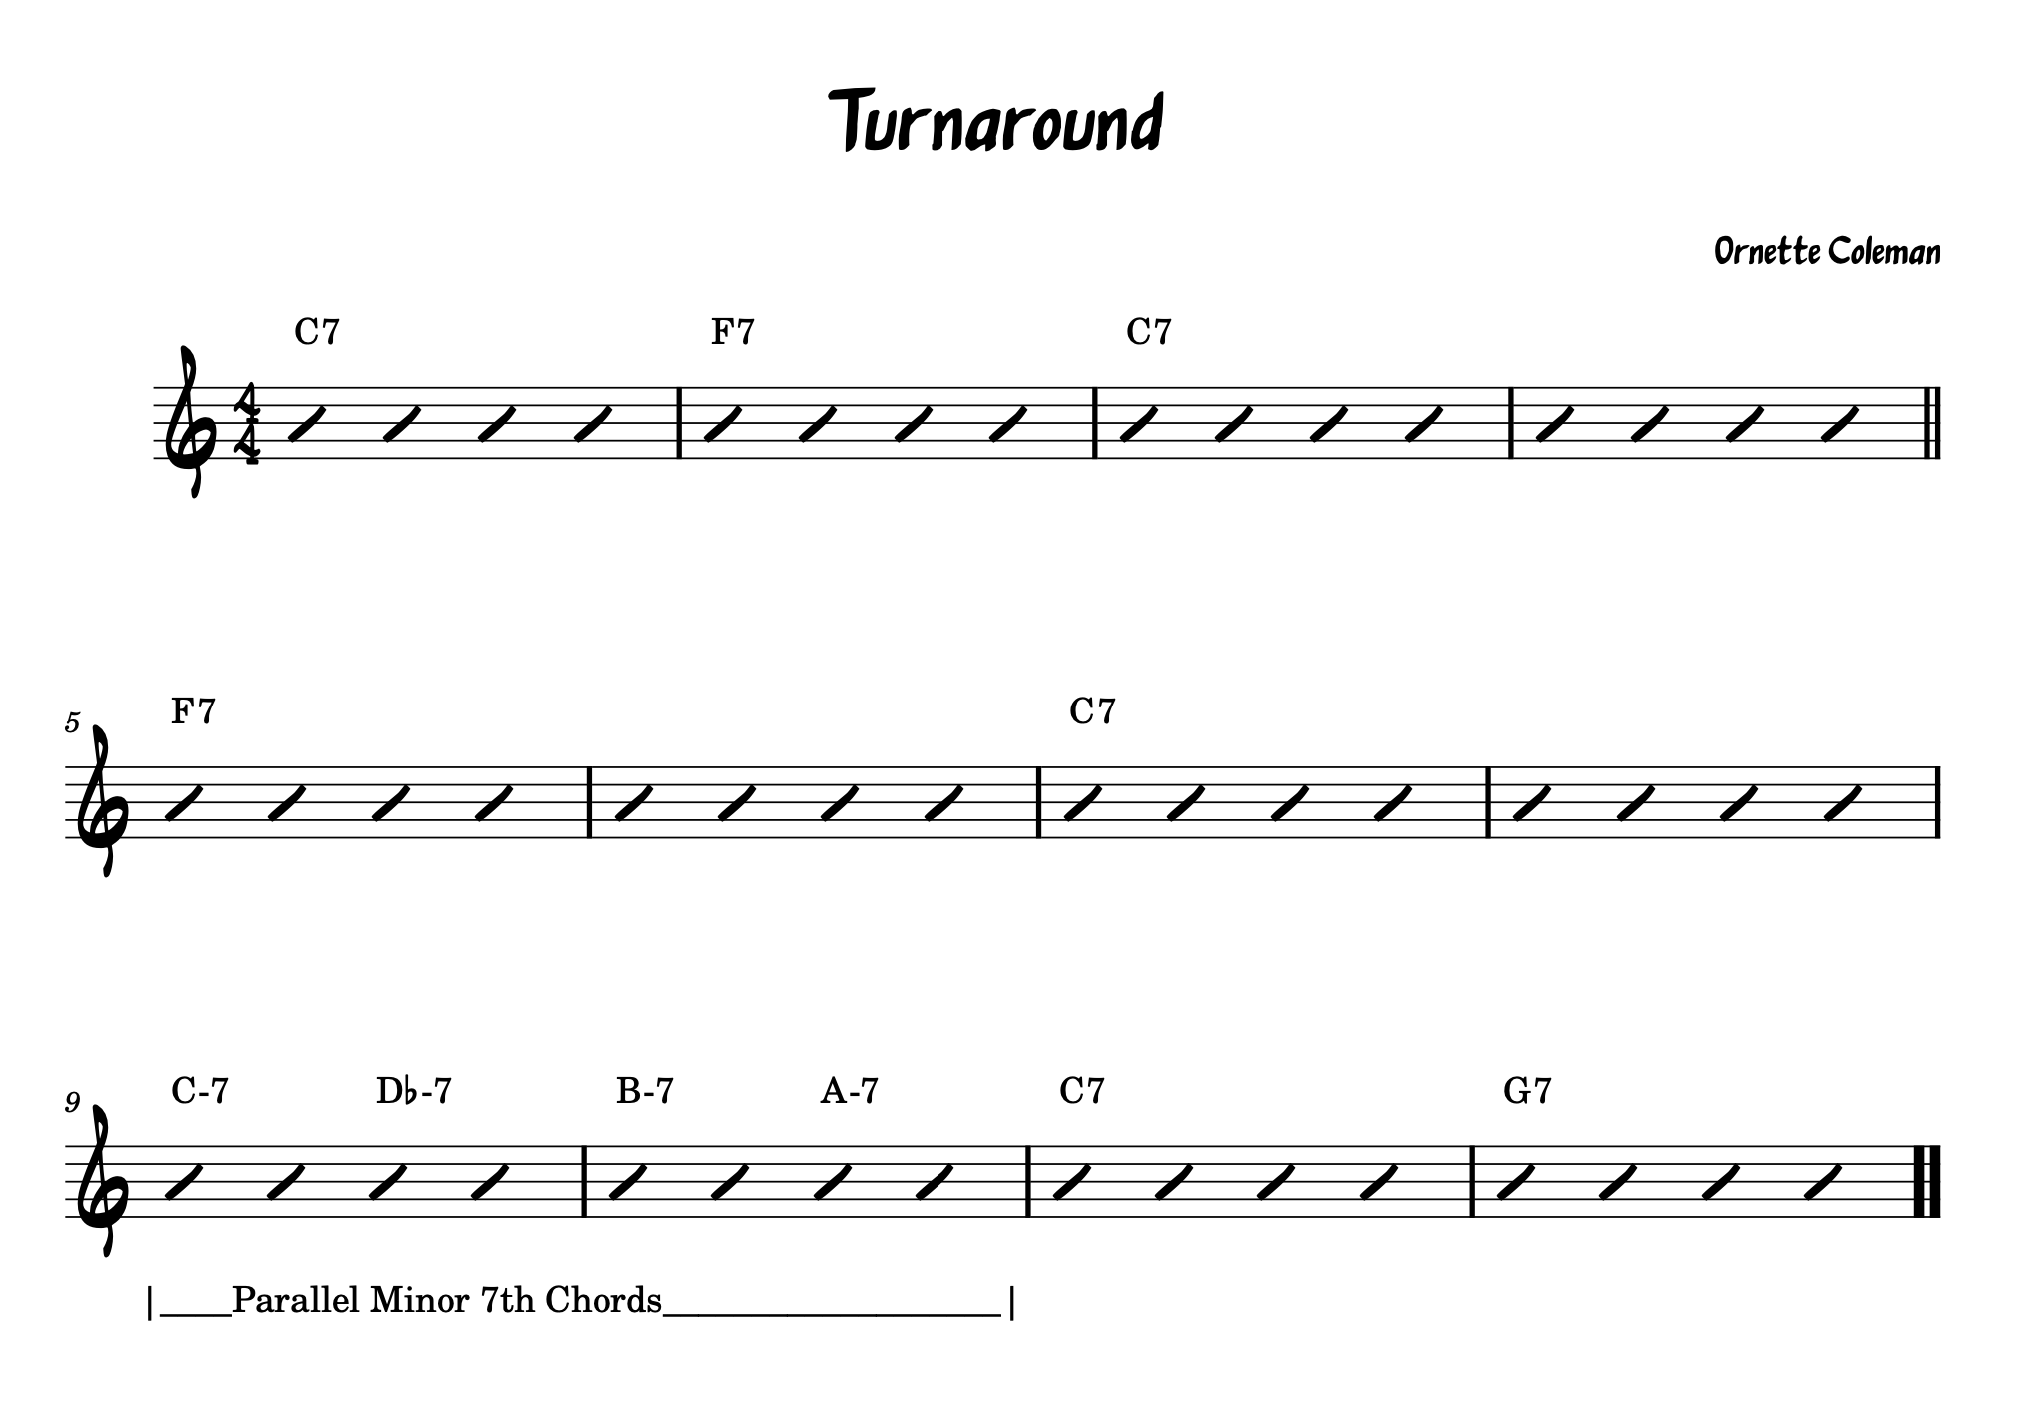 Lead Sheet For Ornette Coleman's Turnaround